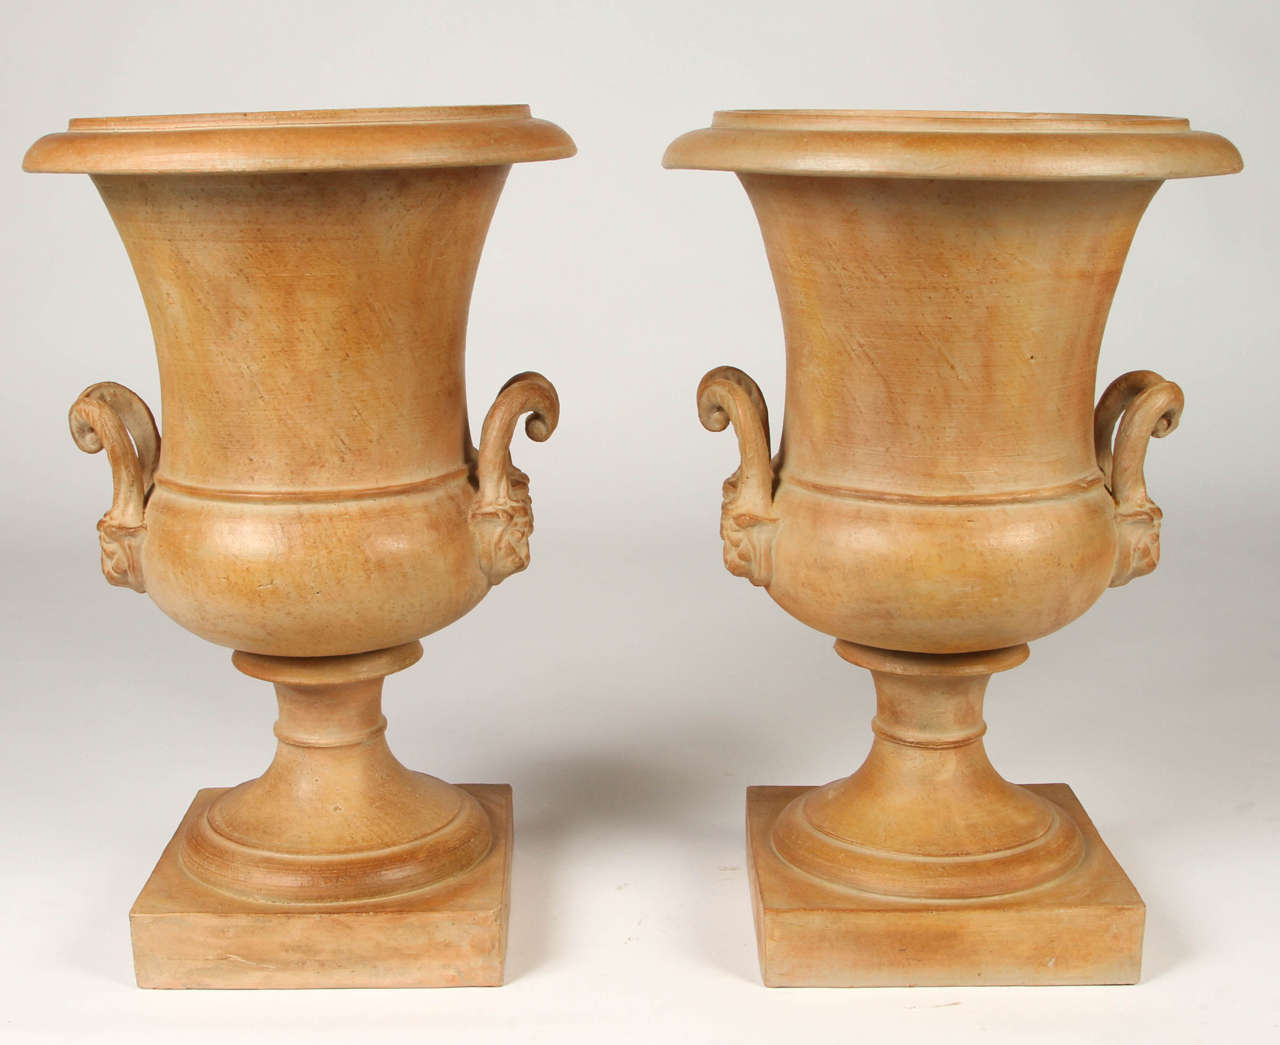 This lovely pair of terracotta urns perfectly exemplify the neoclassical style. They would be a warm addition to any space, indoors or out.